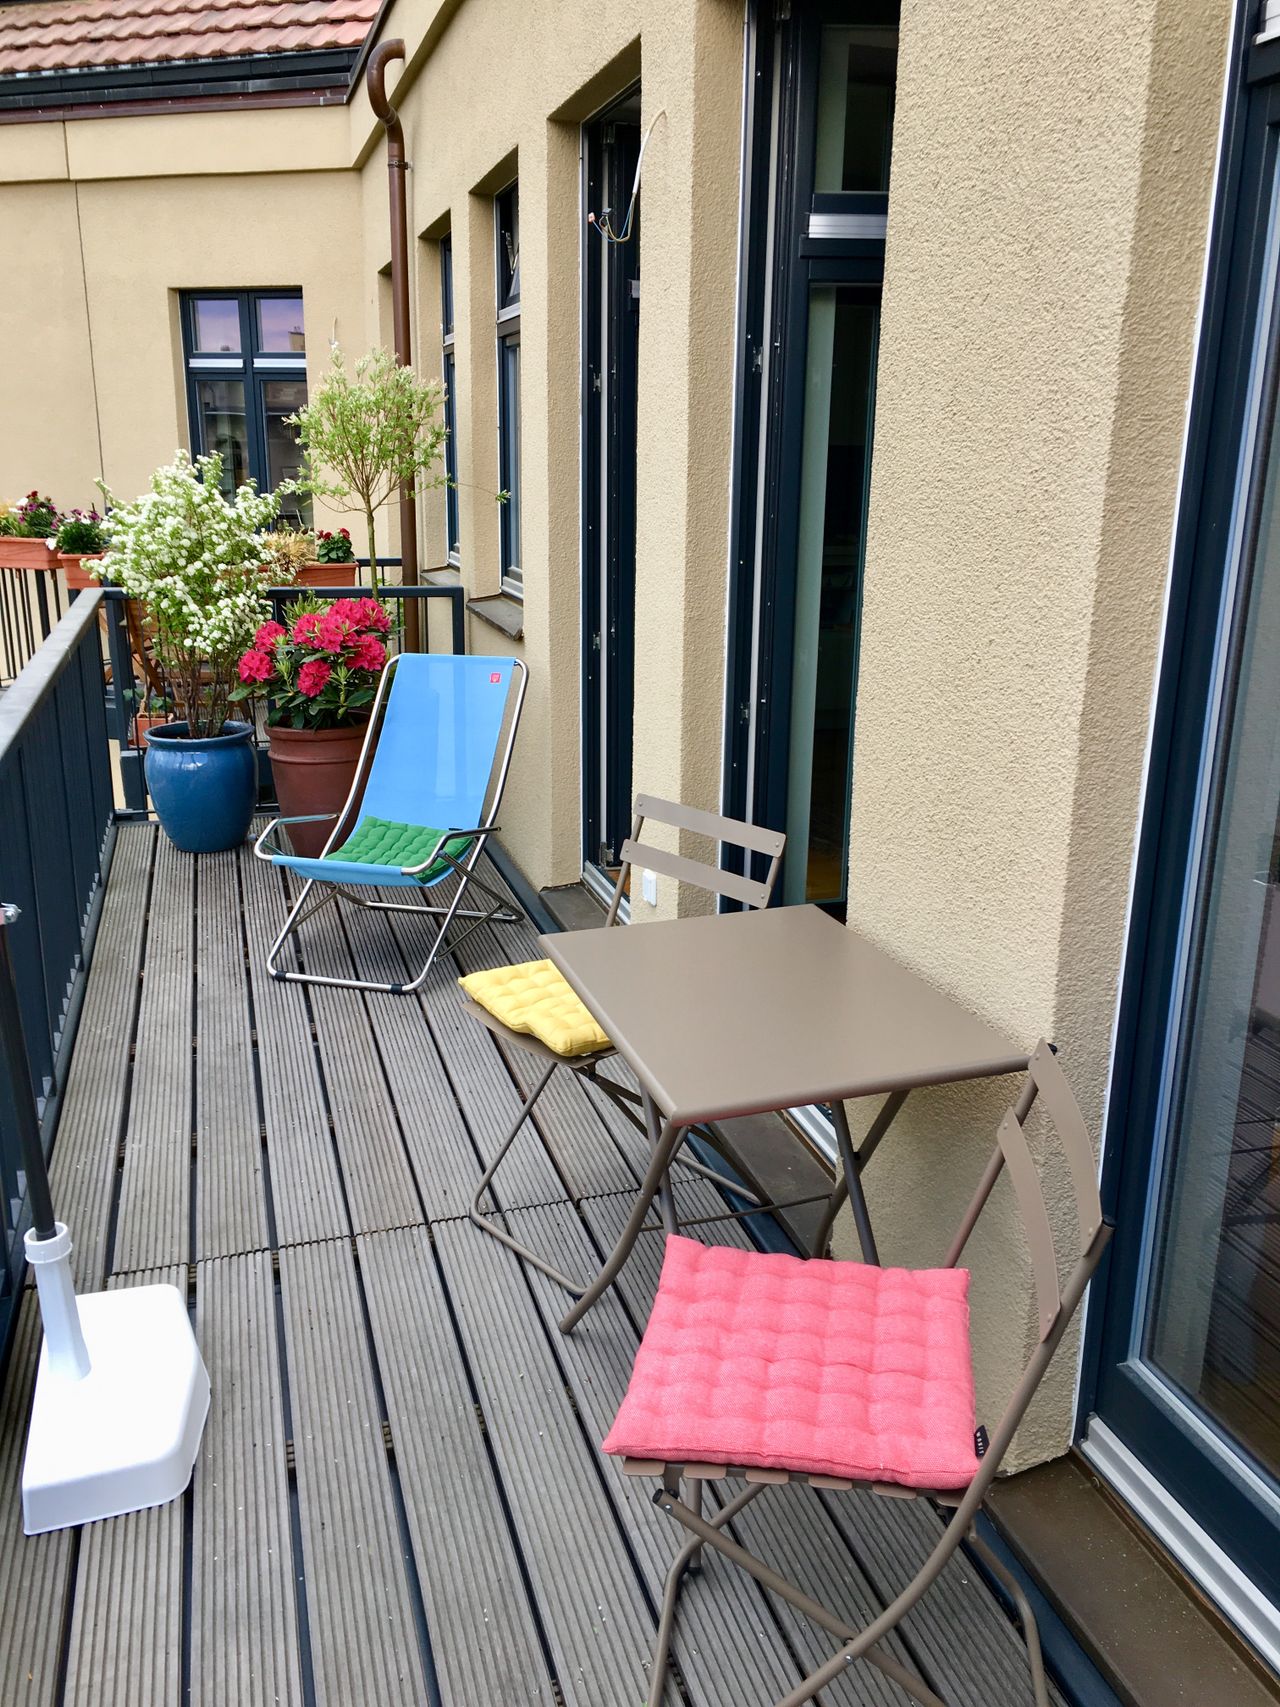 Potsdam: quiet and bright flat with spacious balcony near Sanssouci Palace